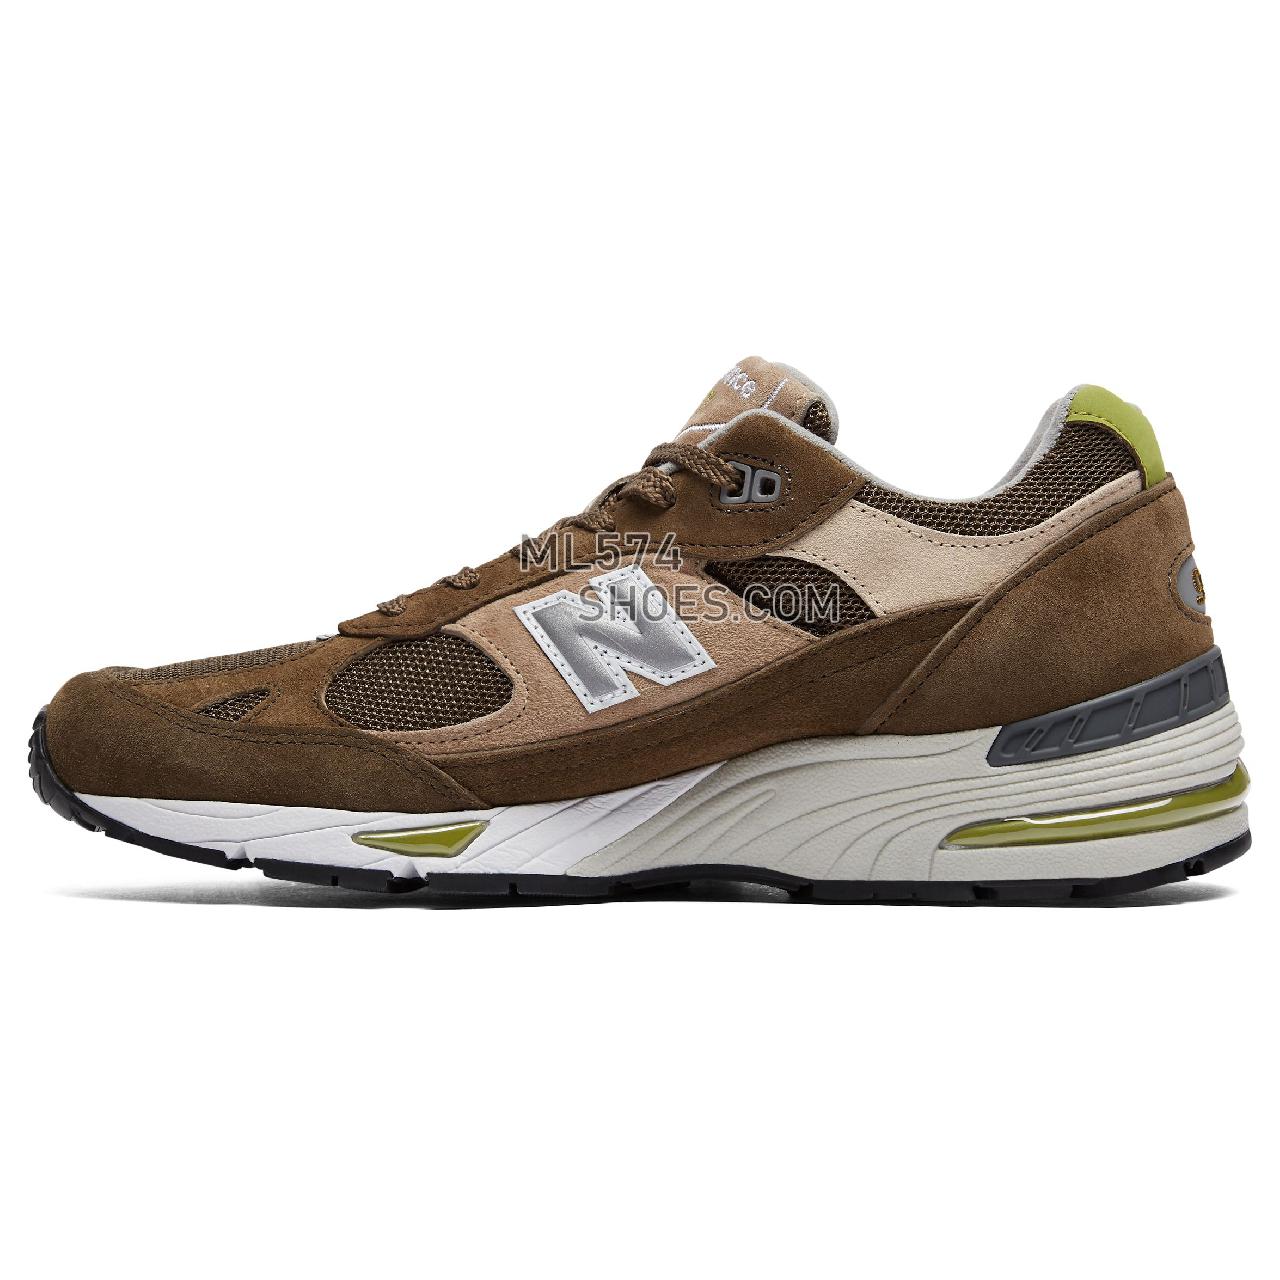 New Balance Made in UK 991 - Men's Made in USA And UK Sneakers - Dark Green with Beige and White - M991OLB